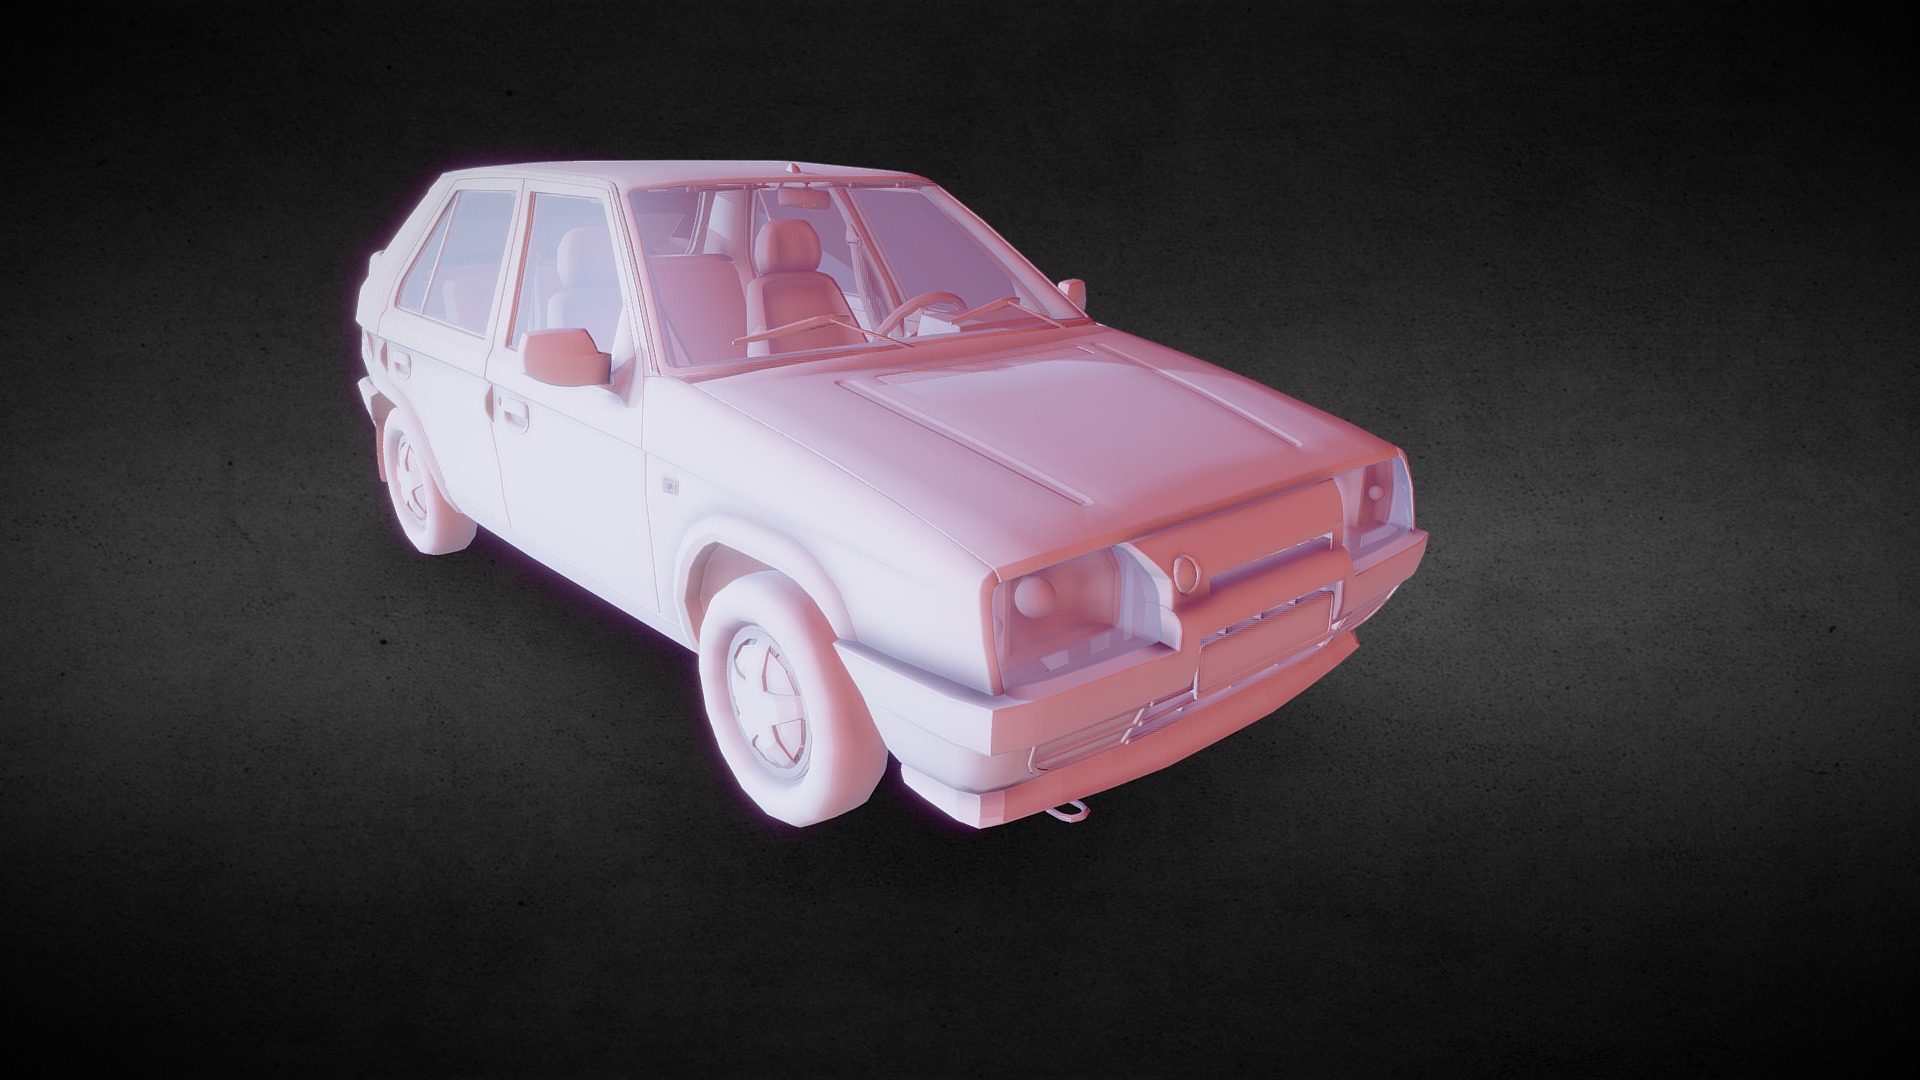 3D model Skoda Favorit - This is a 3D model of the Skoda Favorit. The 3D model is about a pink car on a black surface.